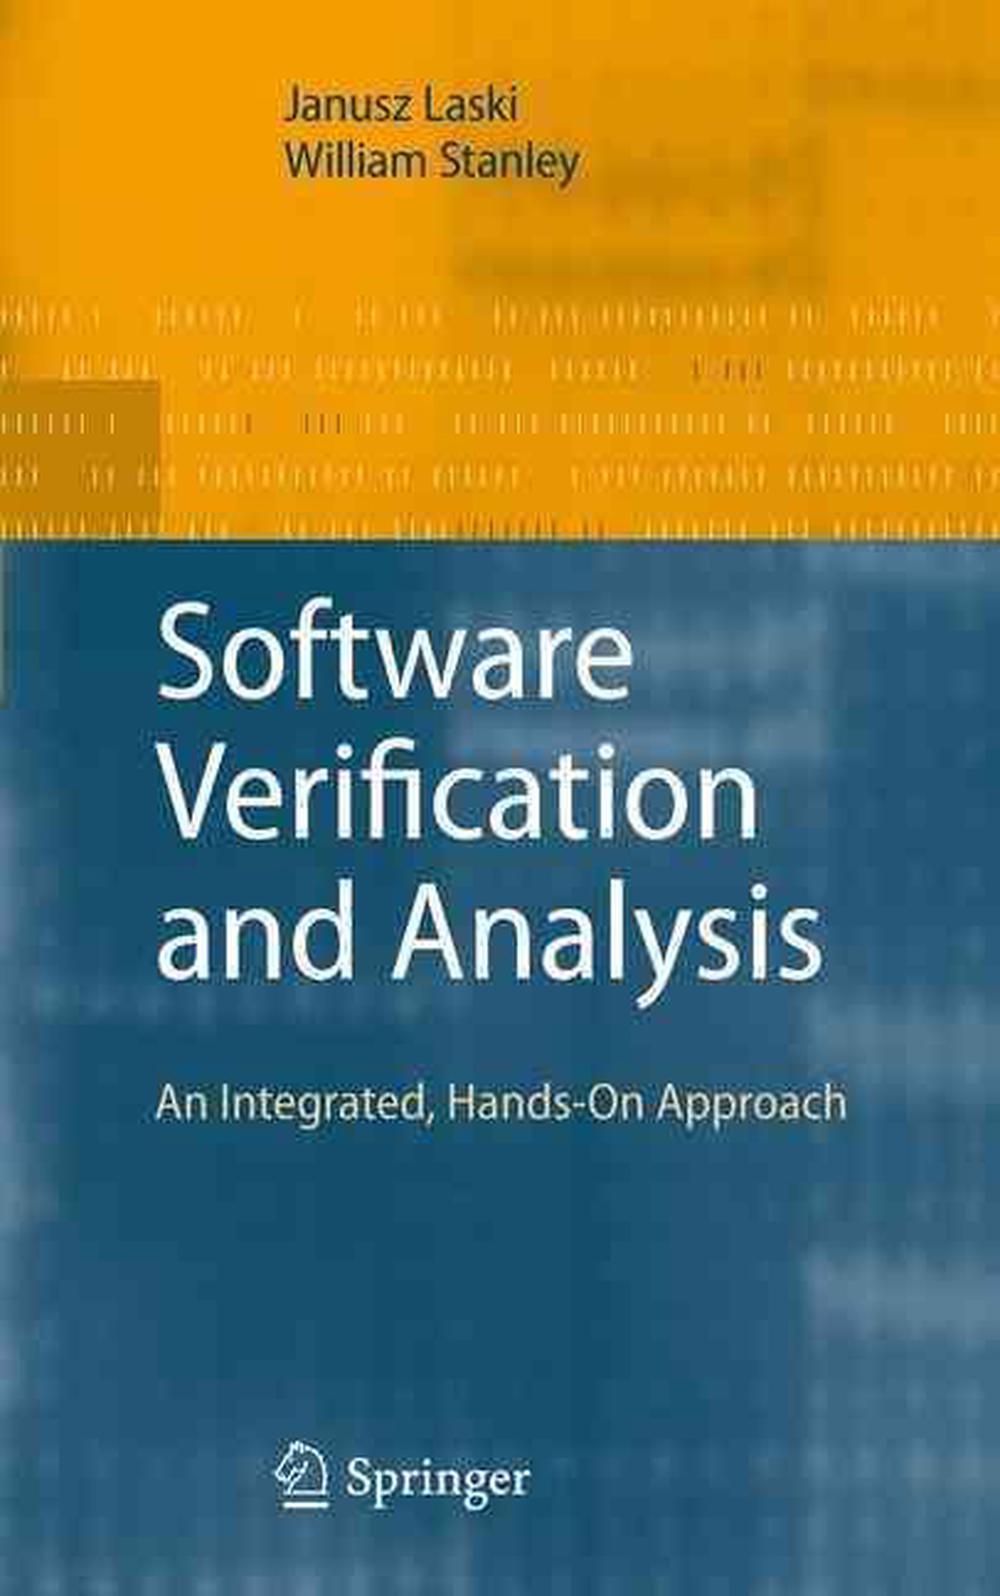 formal verification in software engineering